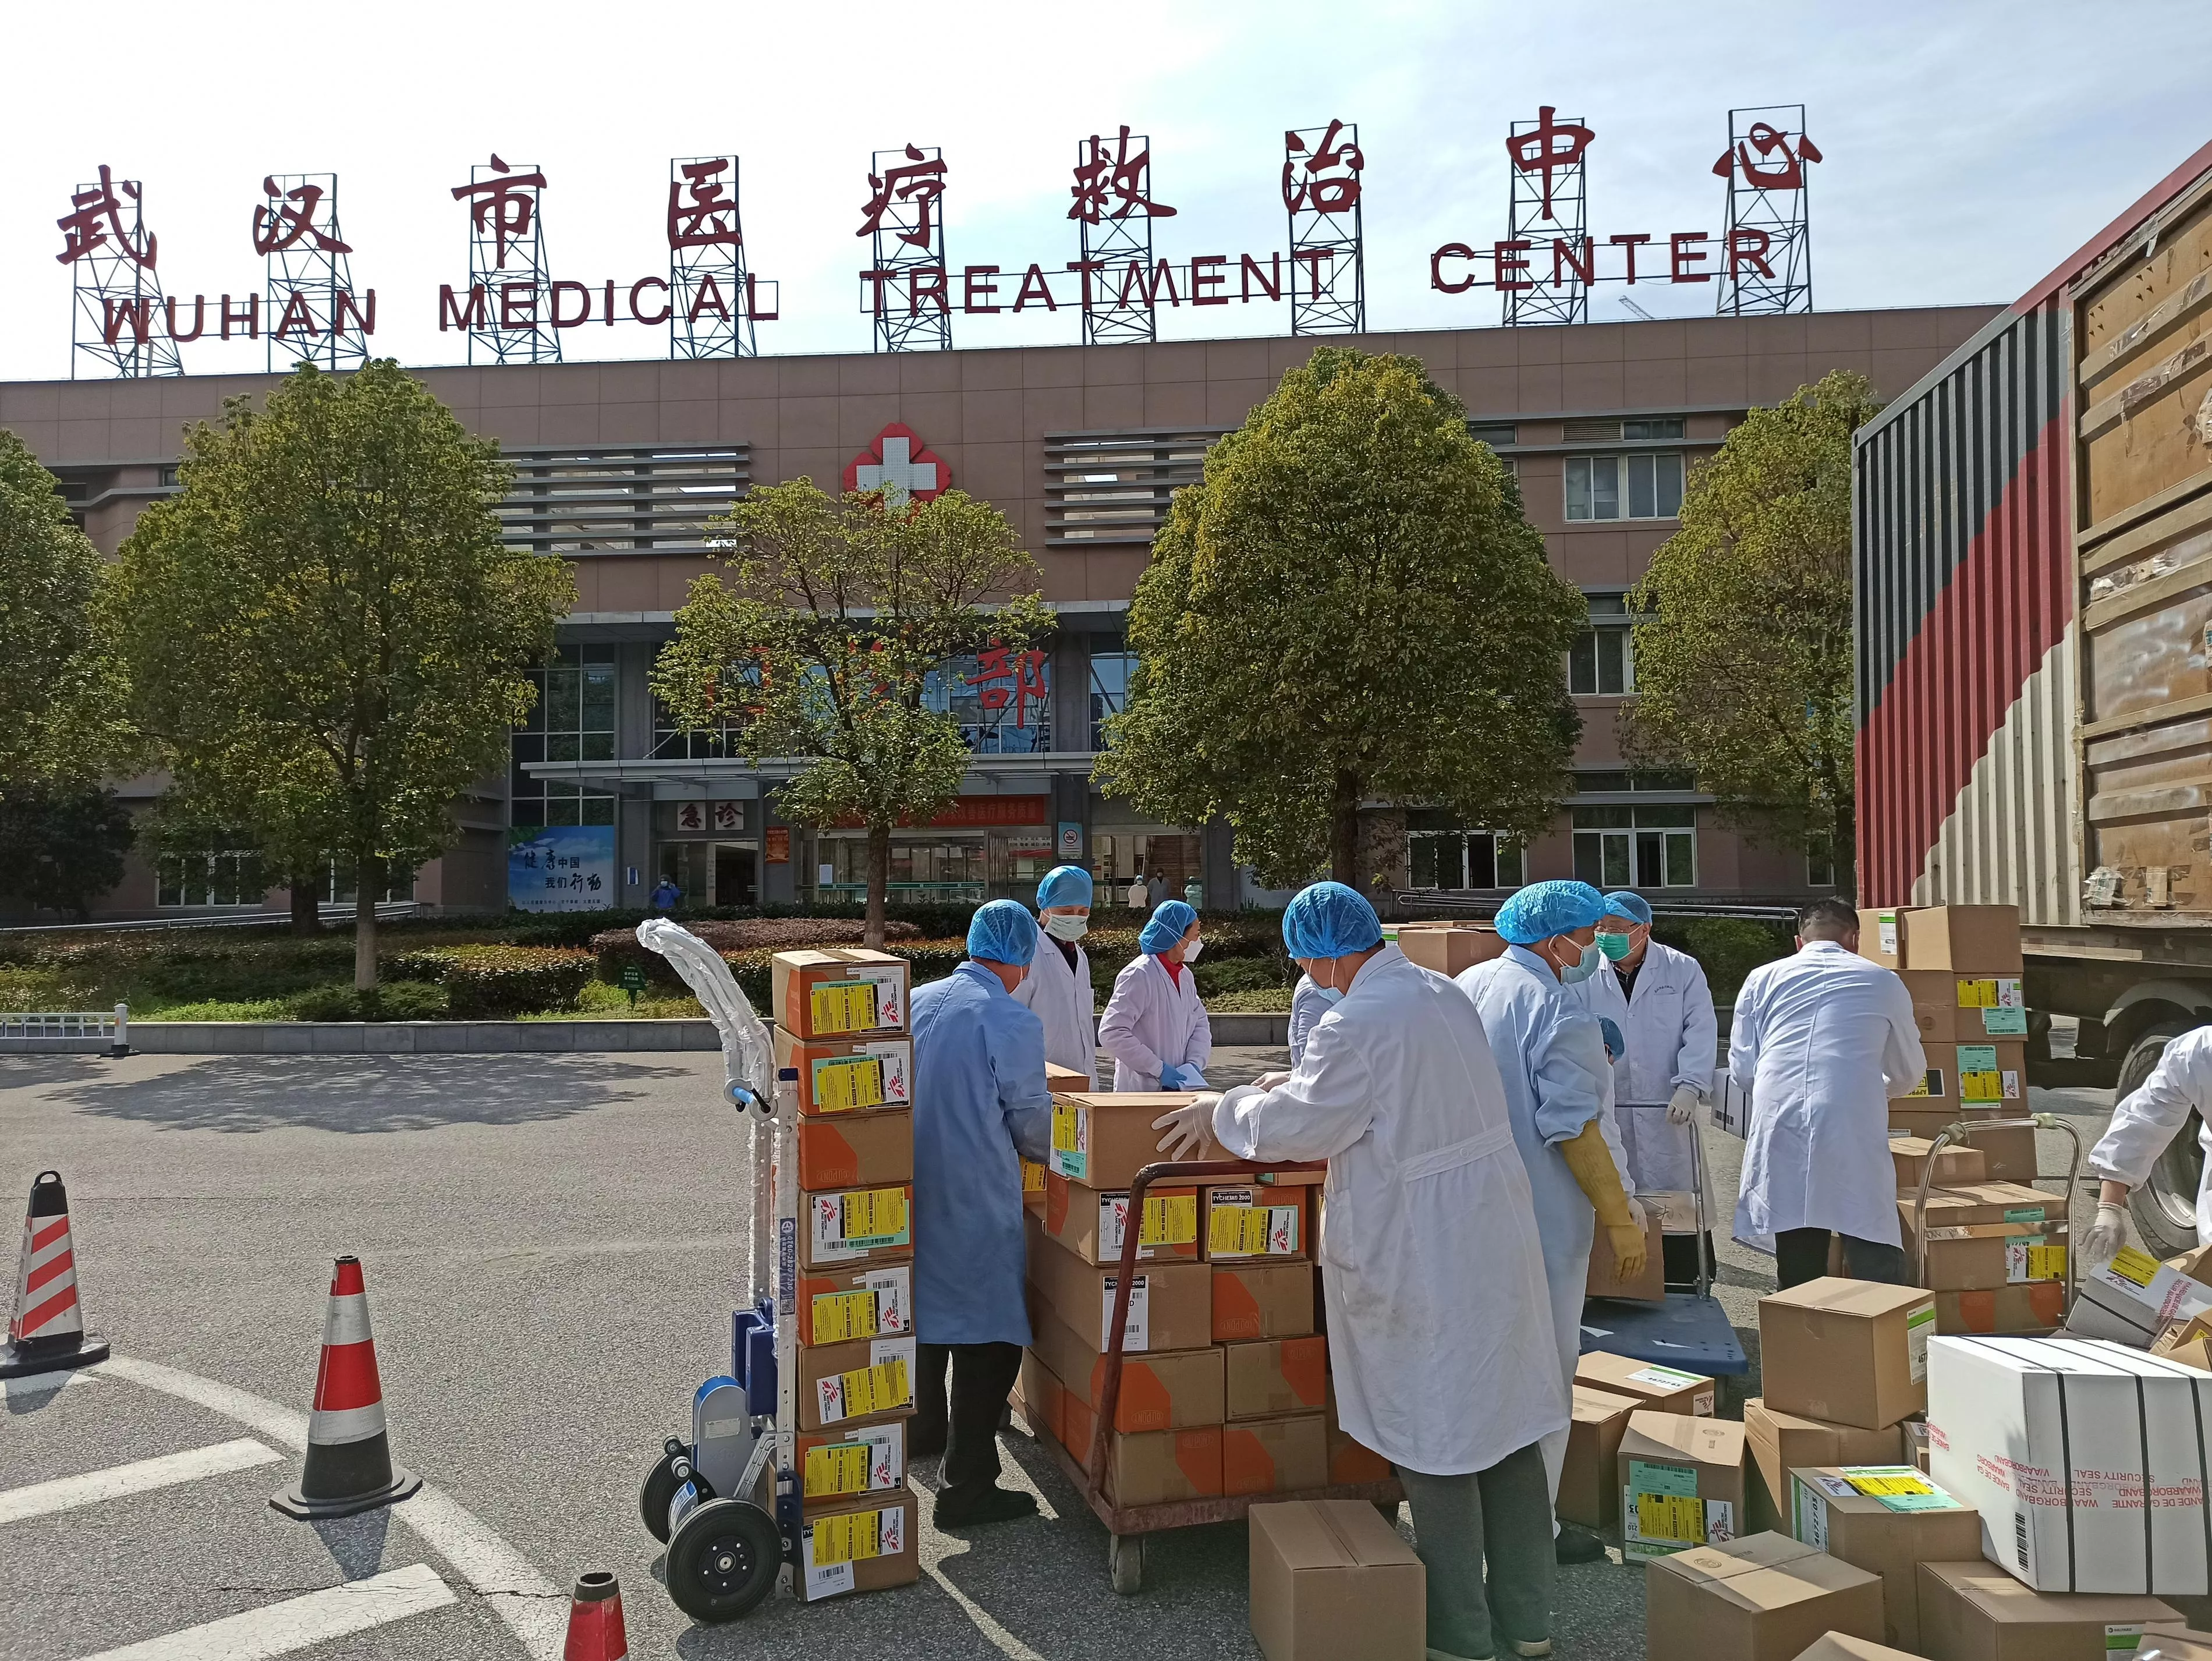 MSF donated 3.5 tonnes of personal protective equipment to health workers at the Wuhan Jinyintan Hospital in Hubei province. Wuhan Jinyintan Hospital is one of the designated hospitals providing treatment to COVID-19 patients, especially those in severe and critical conditions